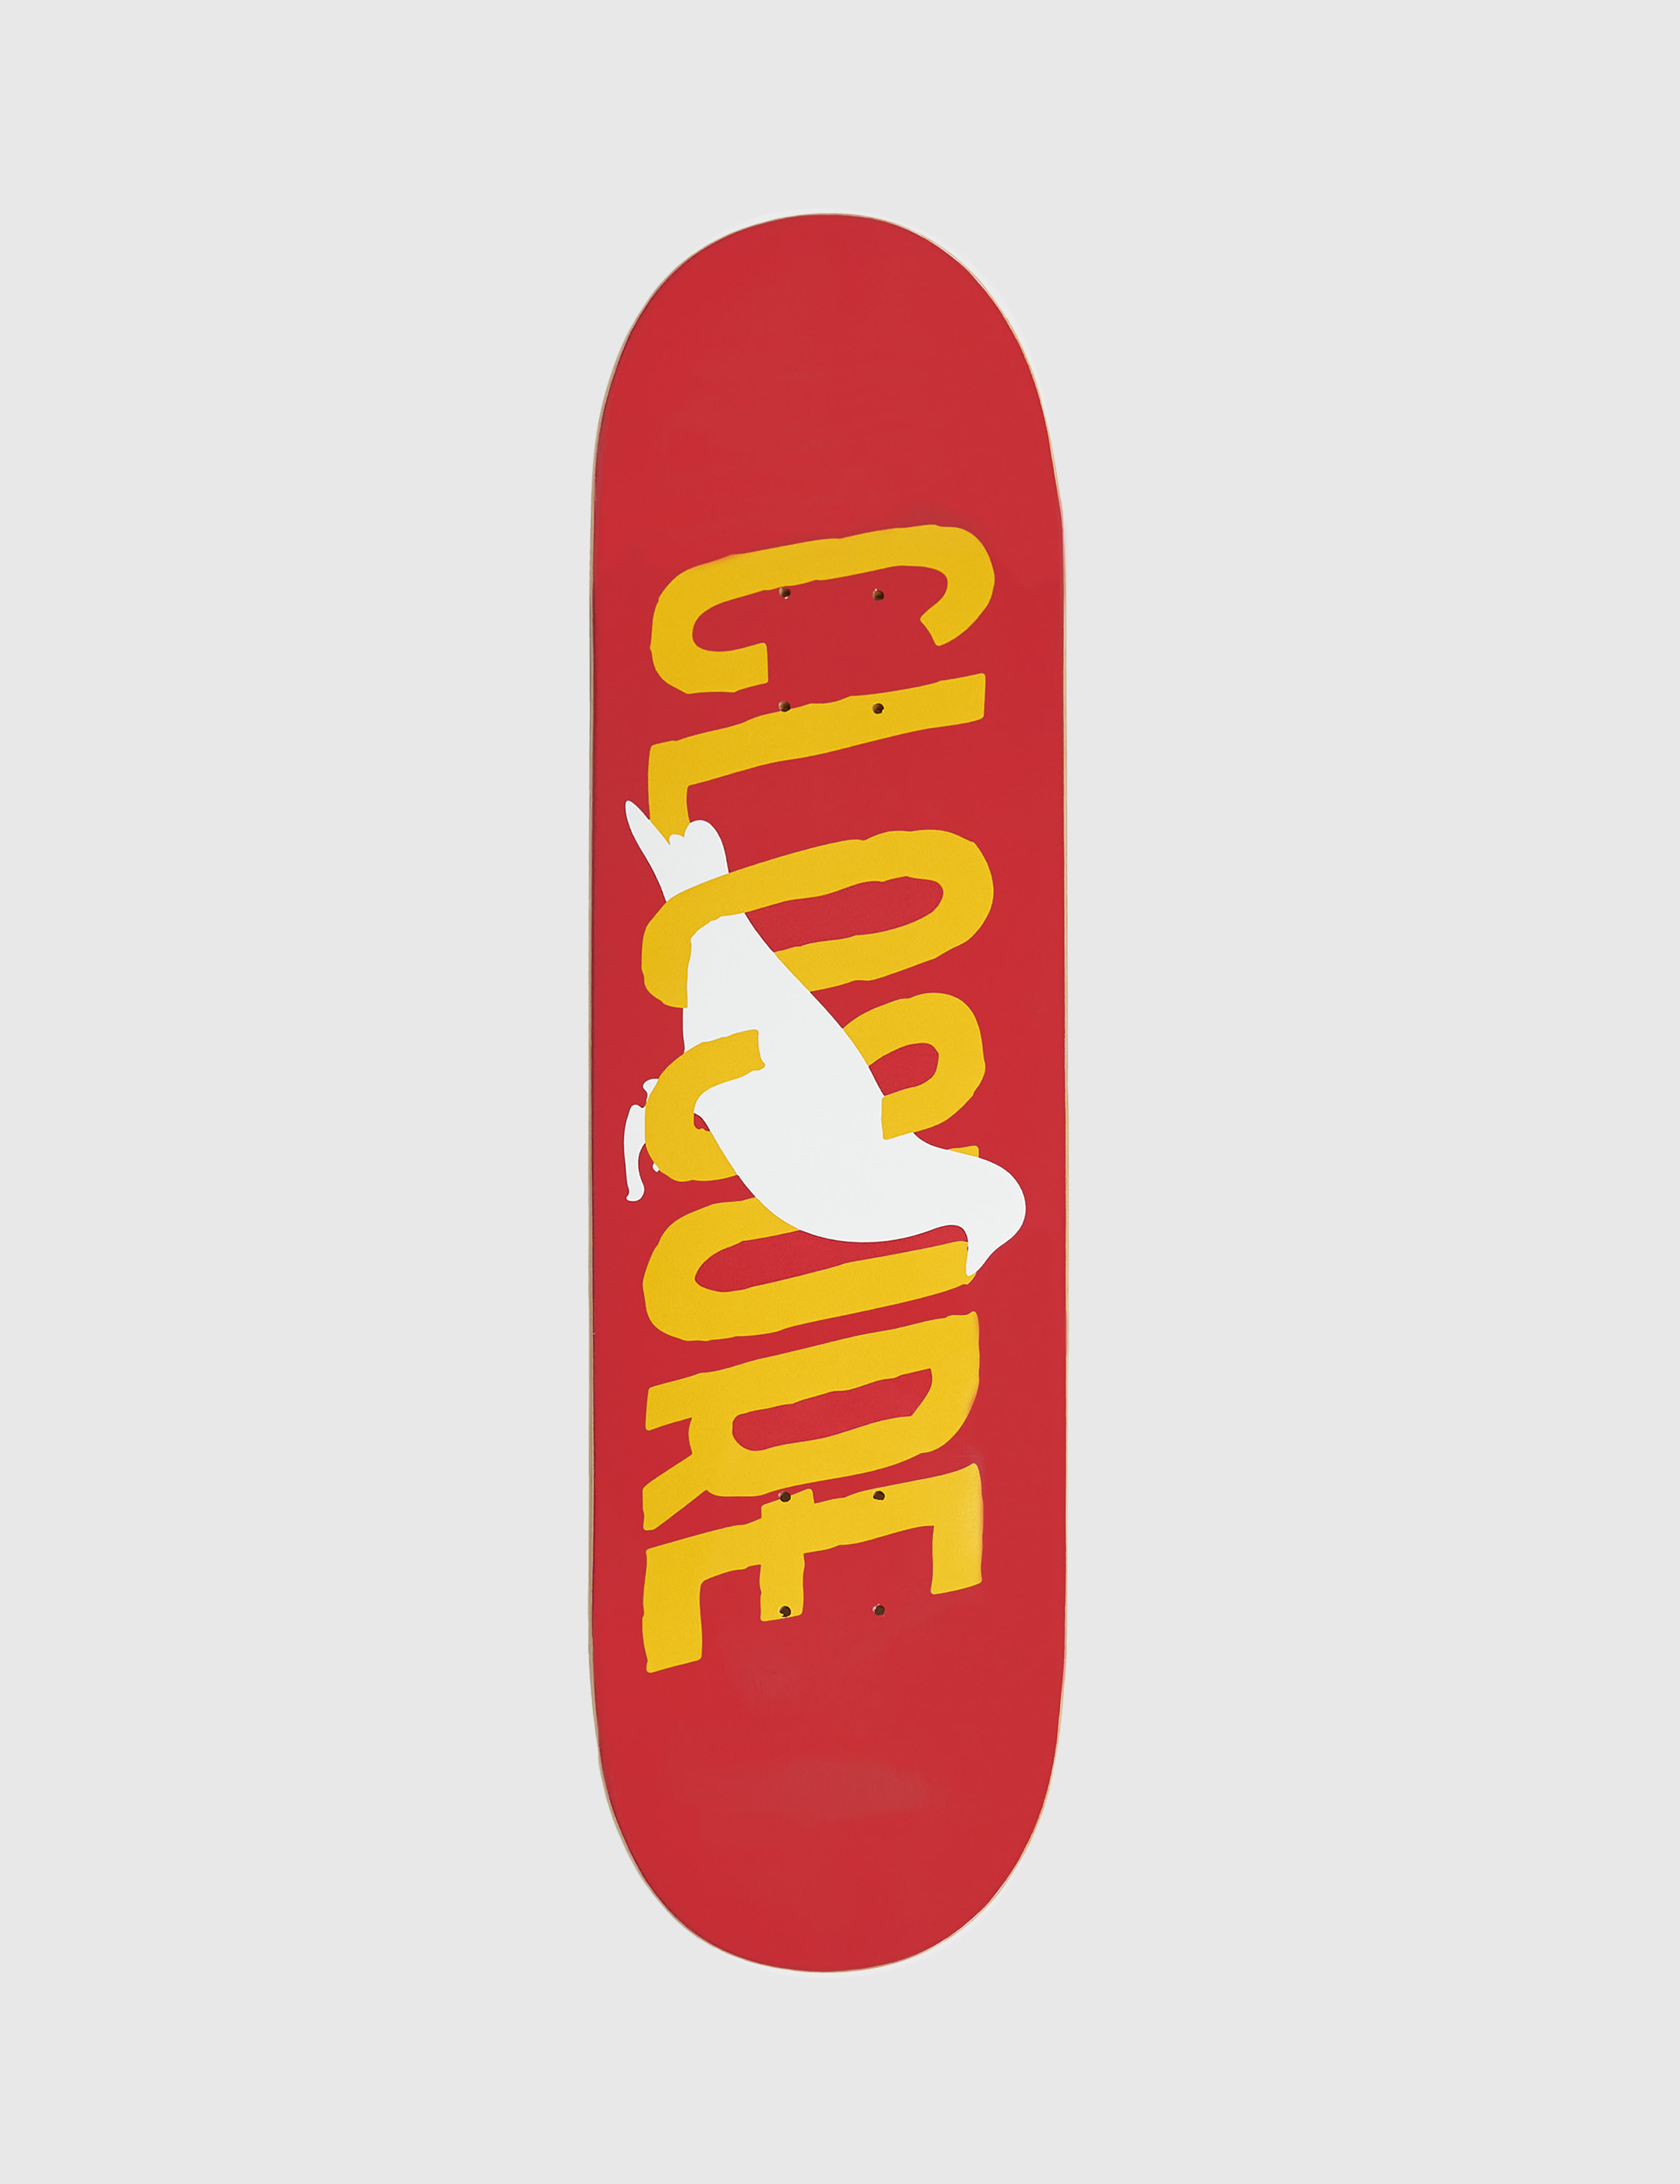 A skate deck for the brand Staple is shown